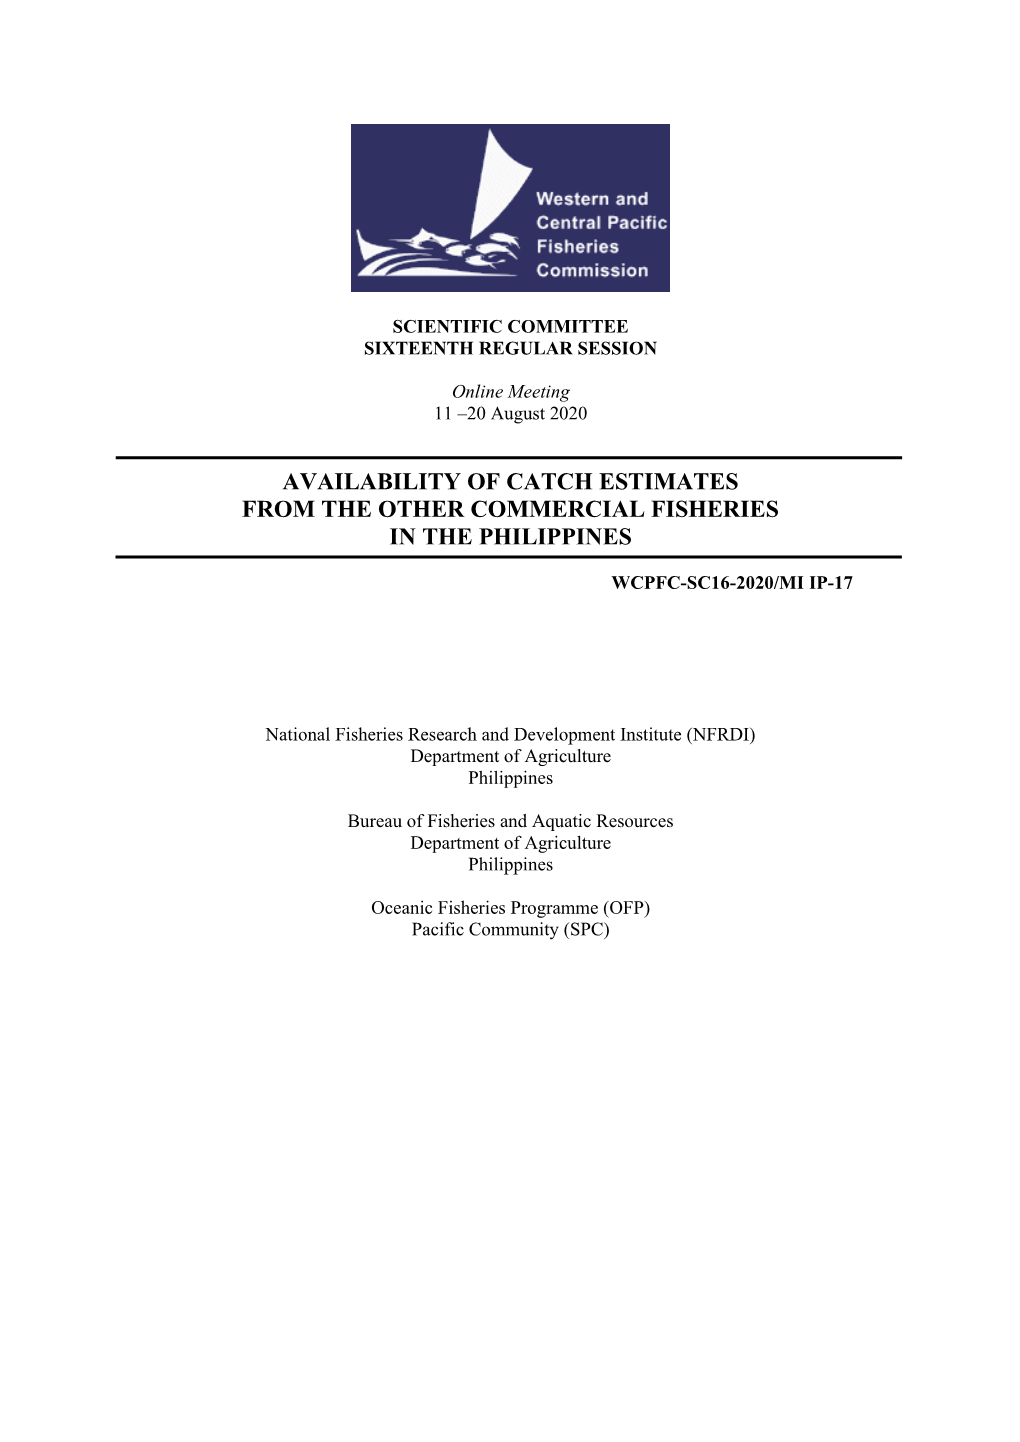 Availability of Catch Estimates from the Other Commercial Fisheries in the Philippines